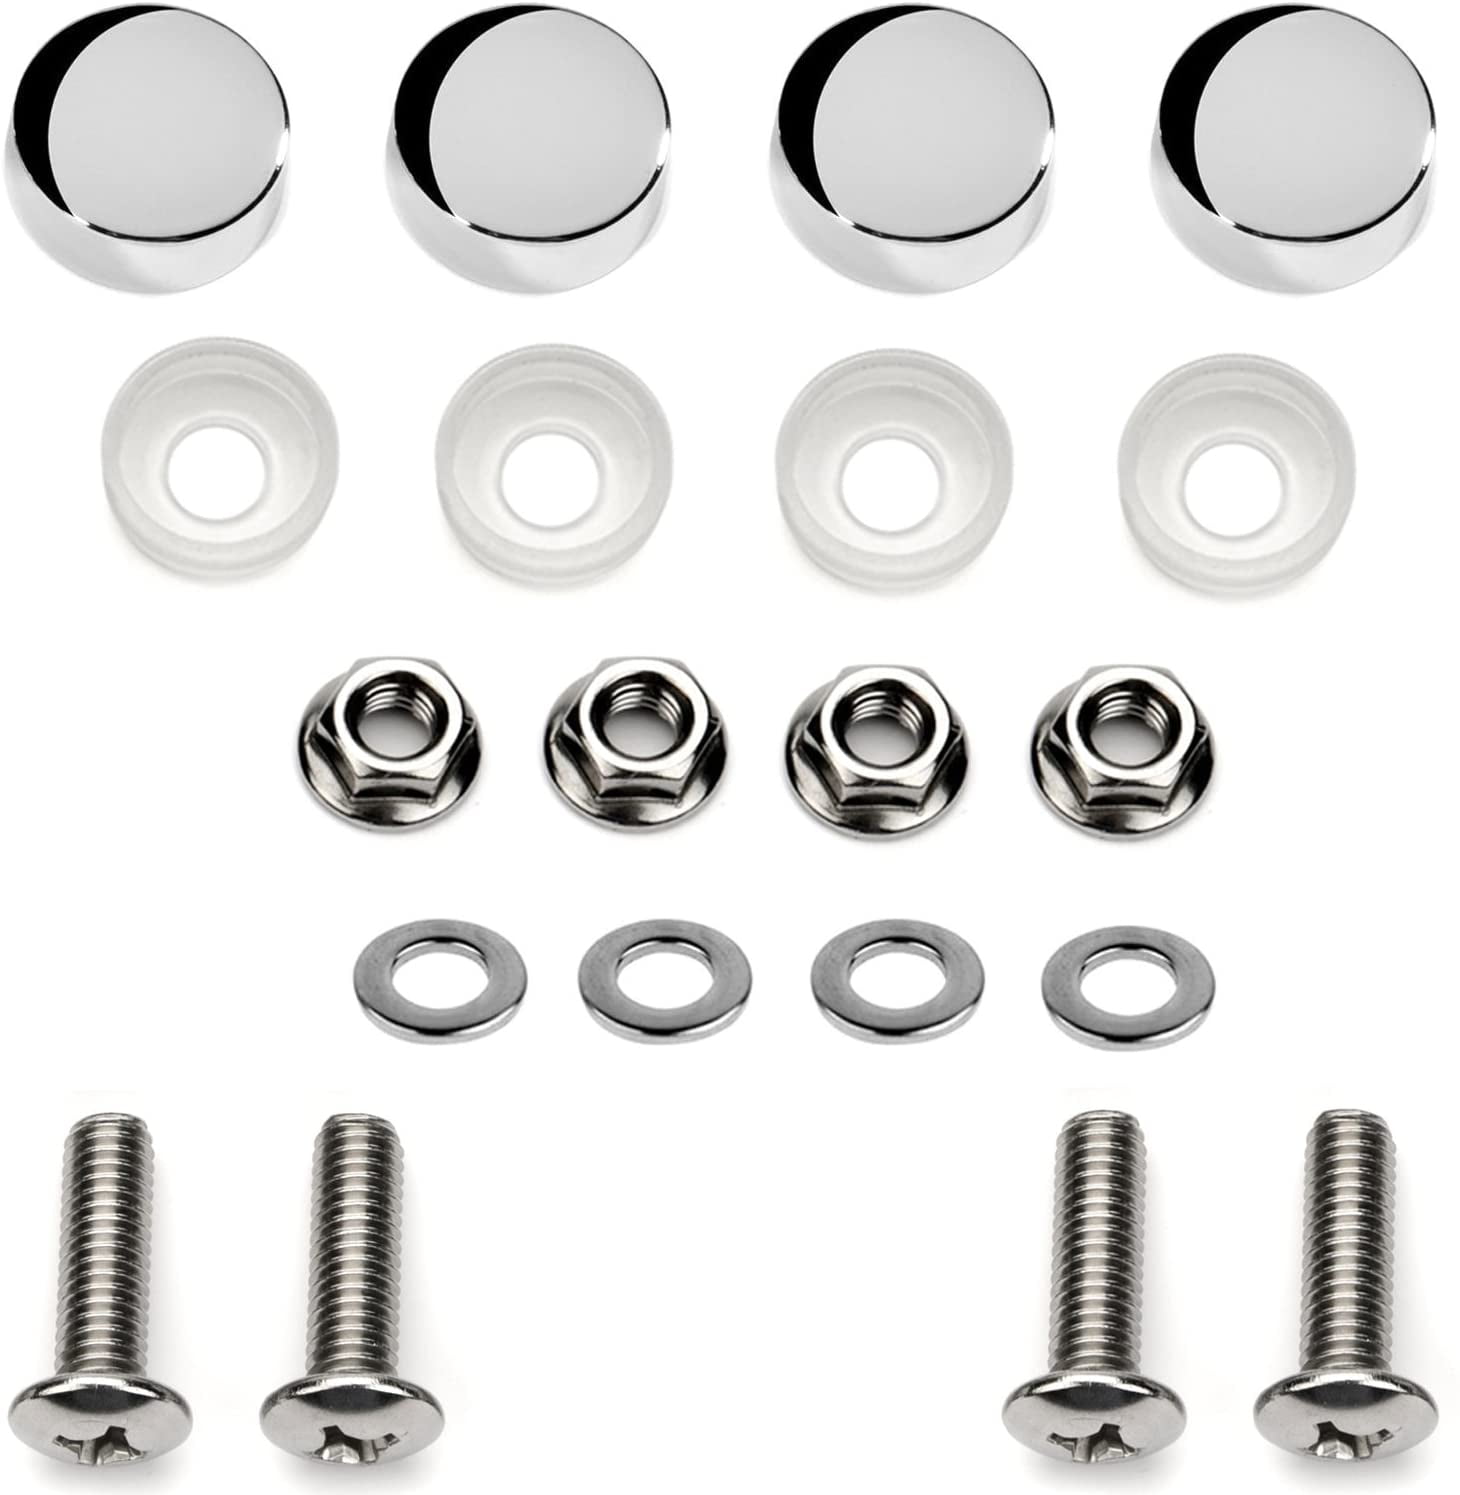 4 Stainless Steel Motorcycle License Plate Frame Bolts Cap Cover Fastener Screws 